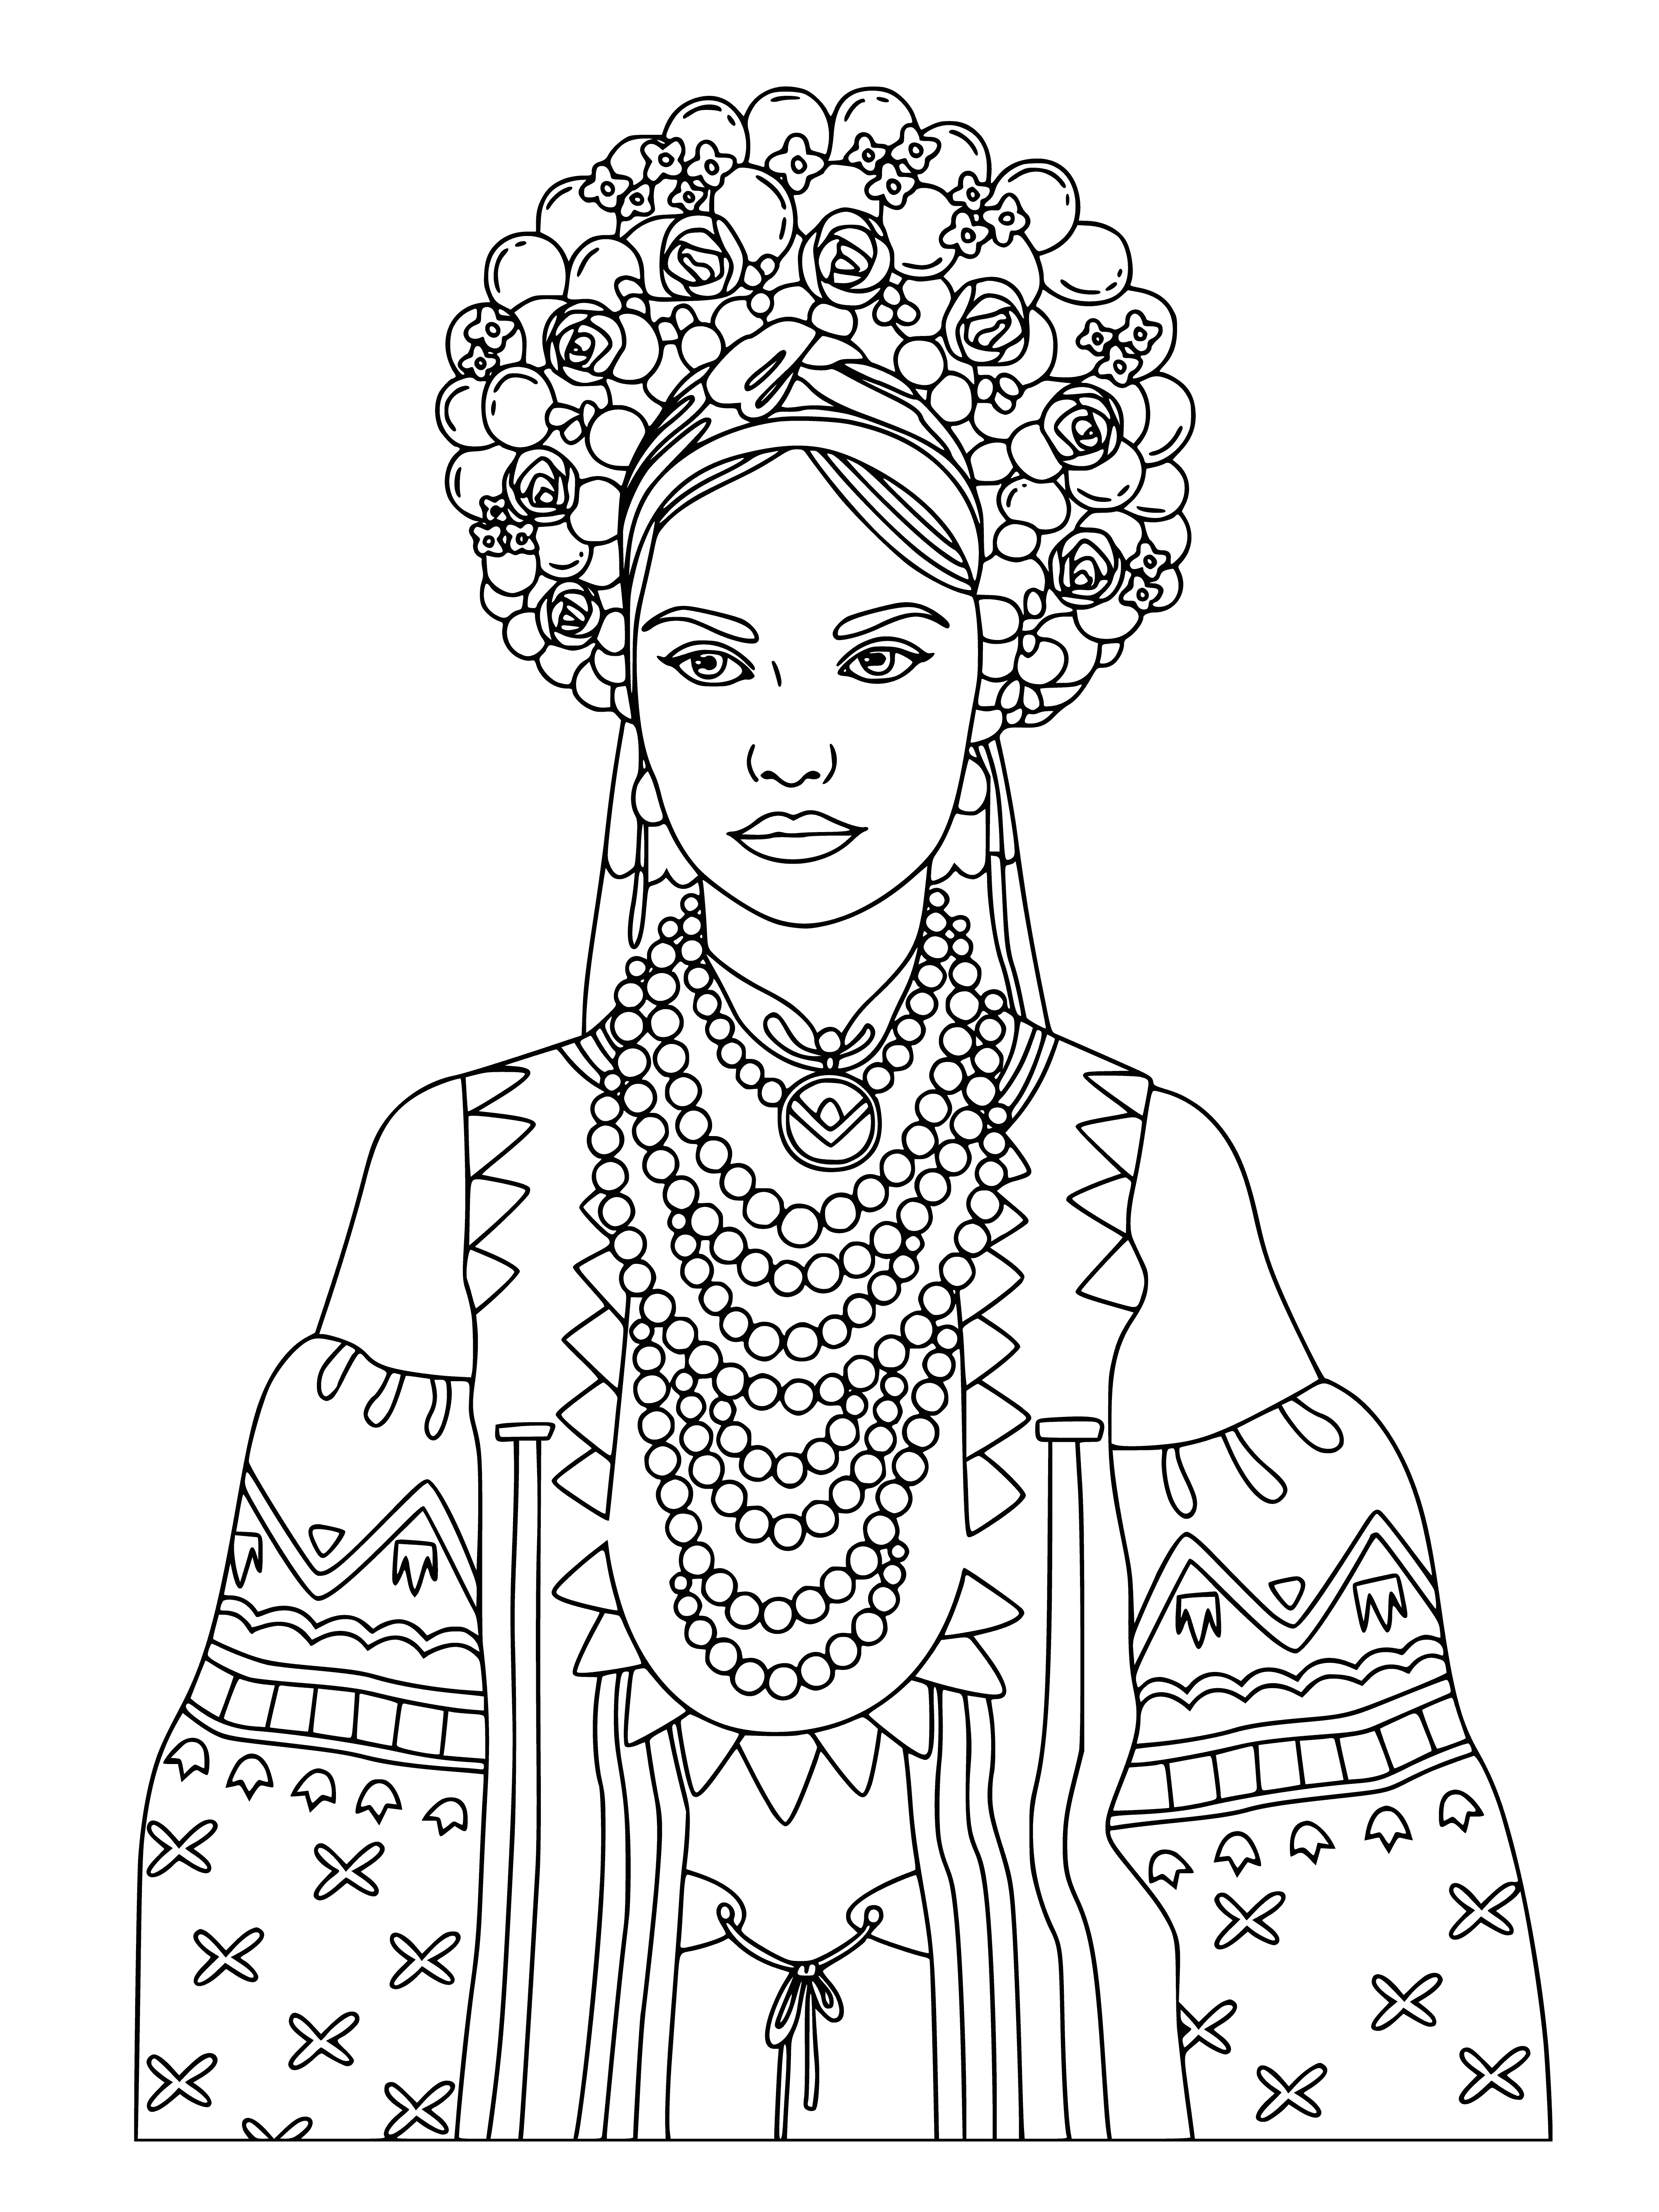 coloring page: Young woman happily colors in a book, her loyal cat curled in her lap while a cup of coffee awaits.